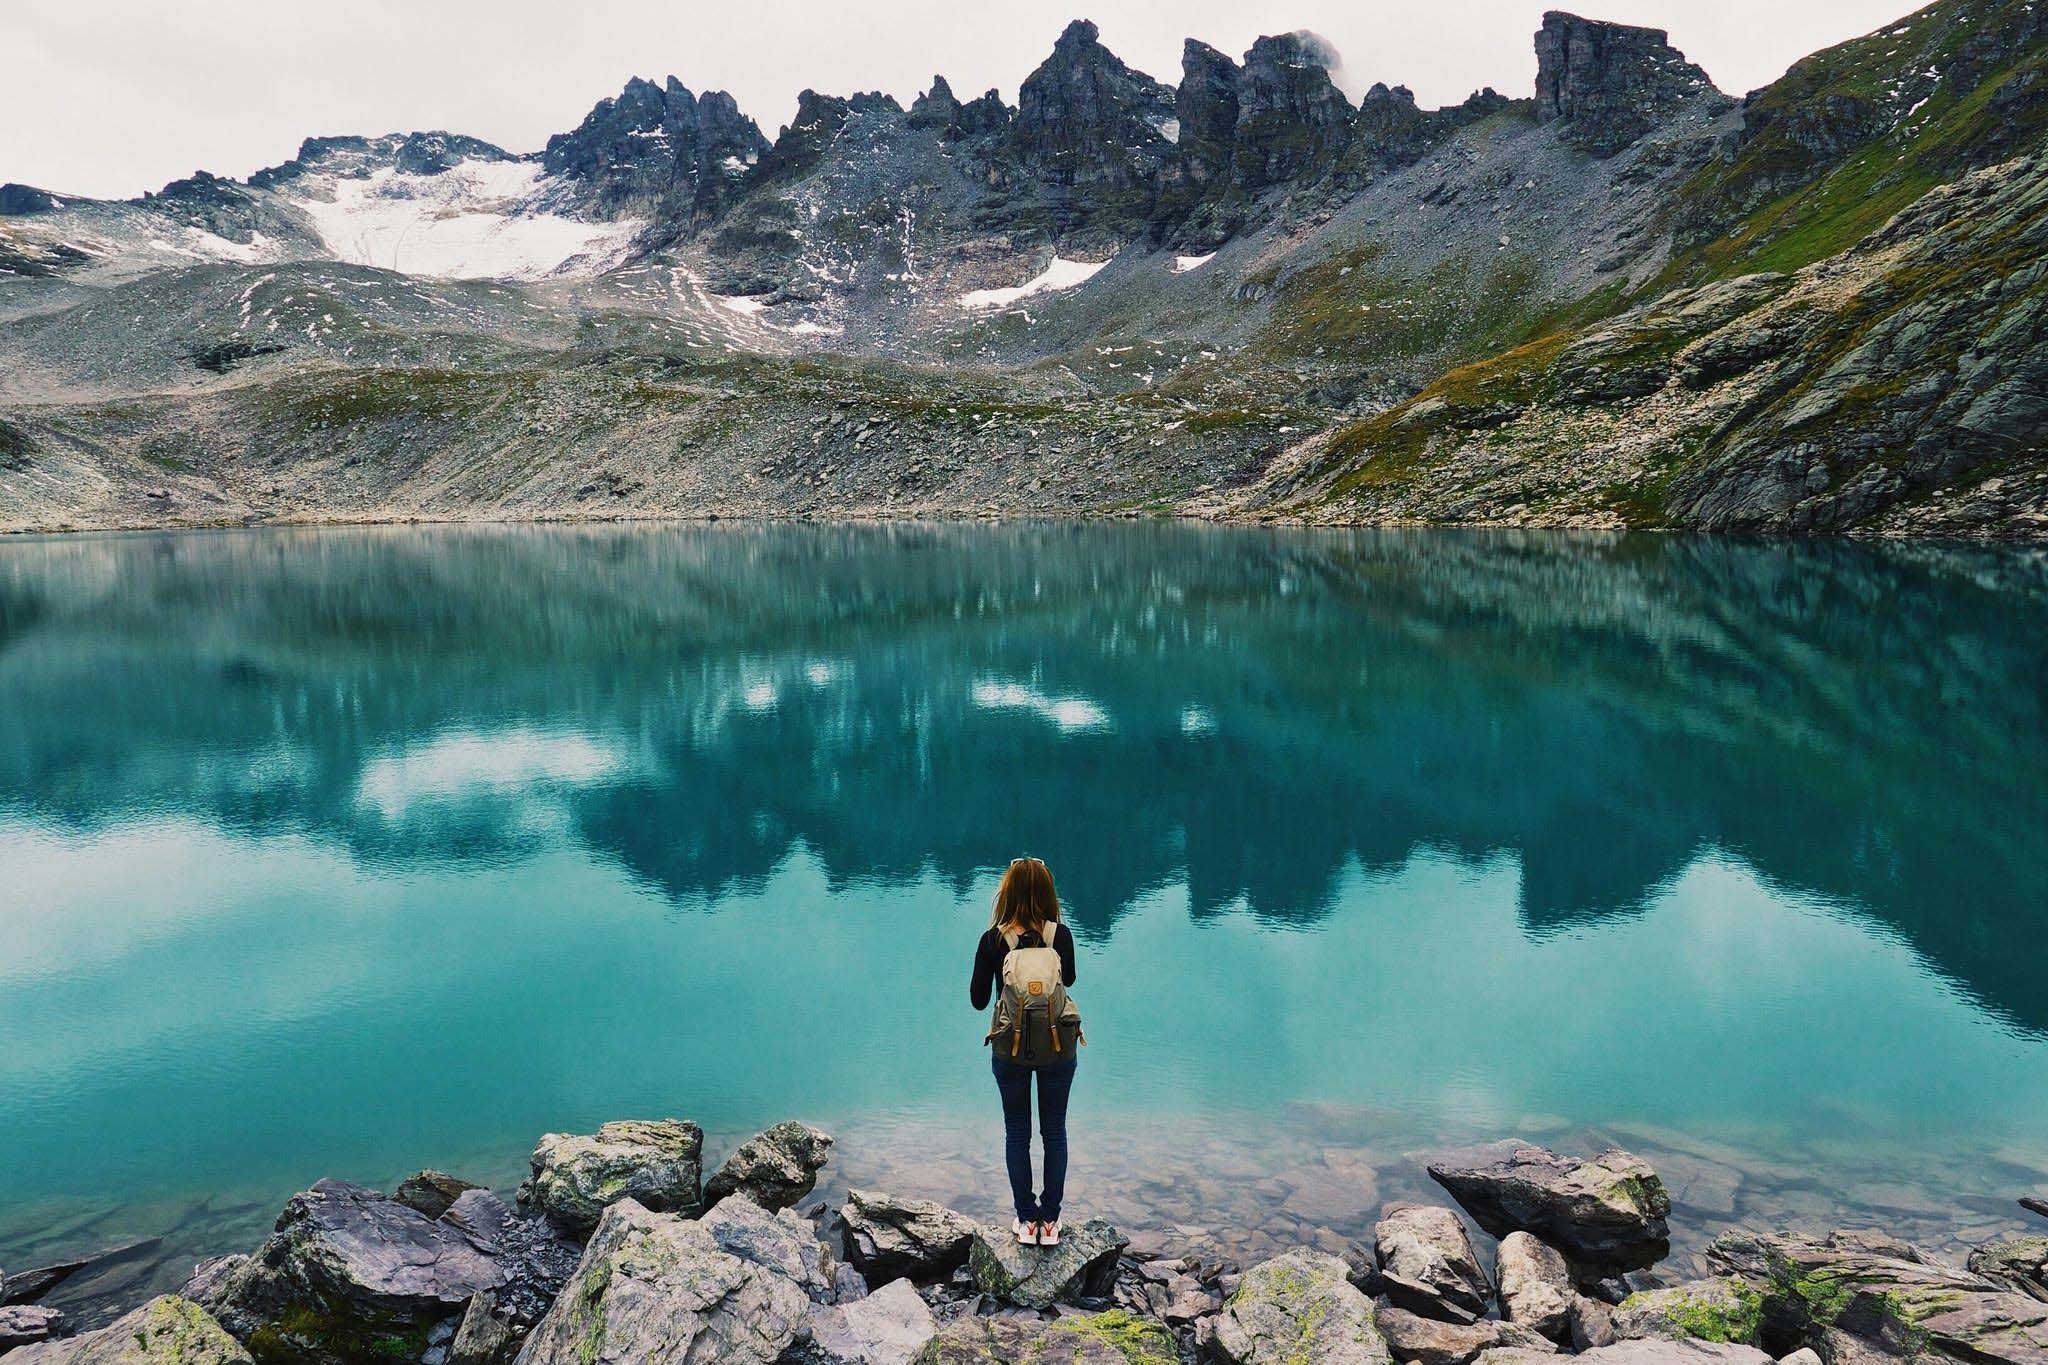 General 2048x1365 photography nature landscape lake hiking turquoise water mountains women overcast daylight women outdoors